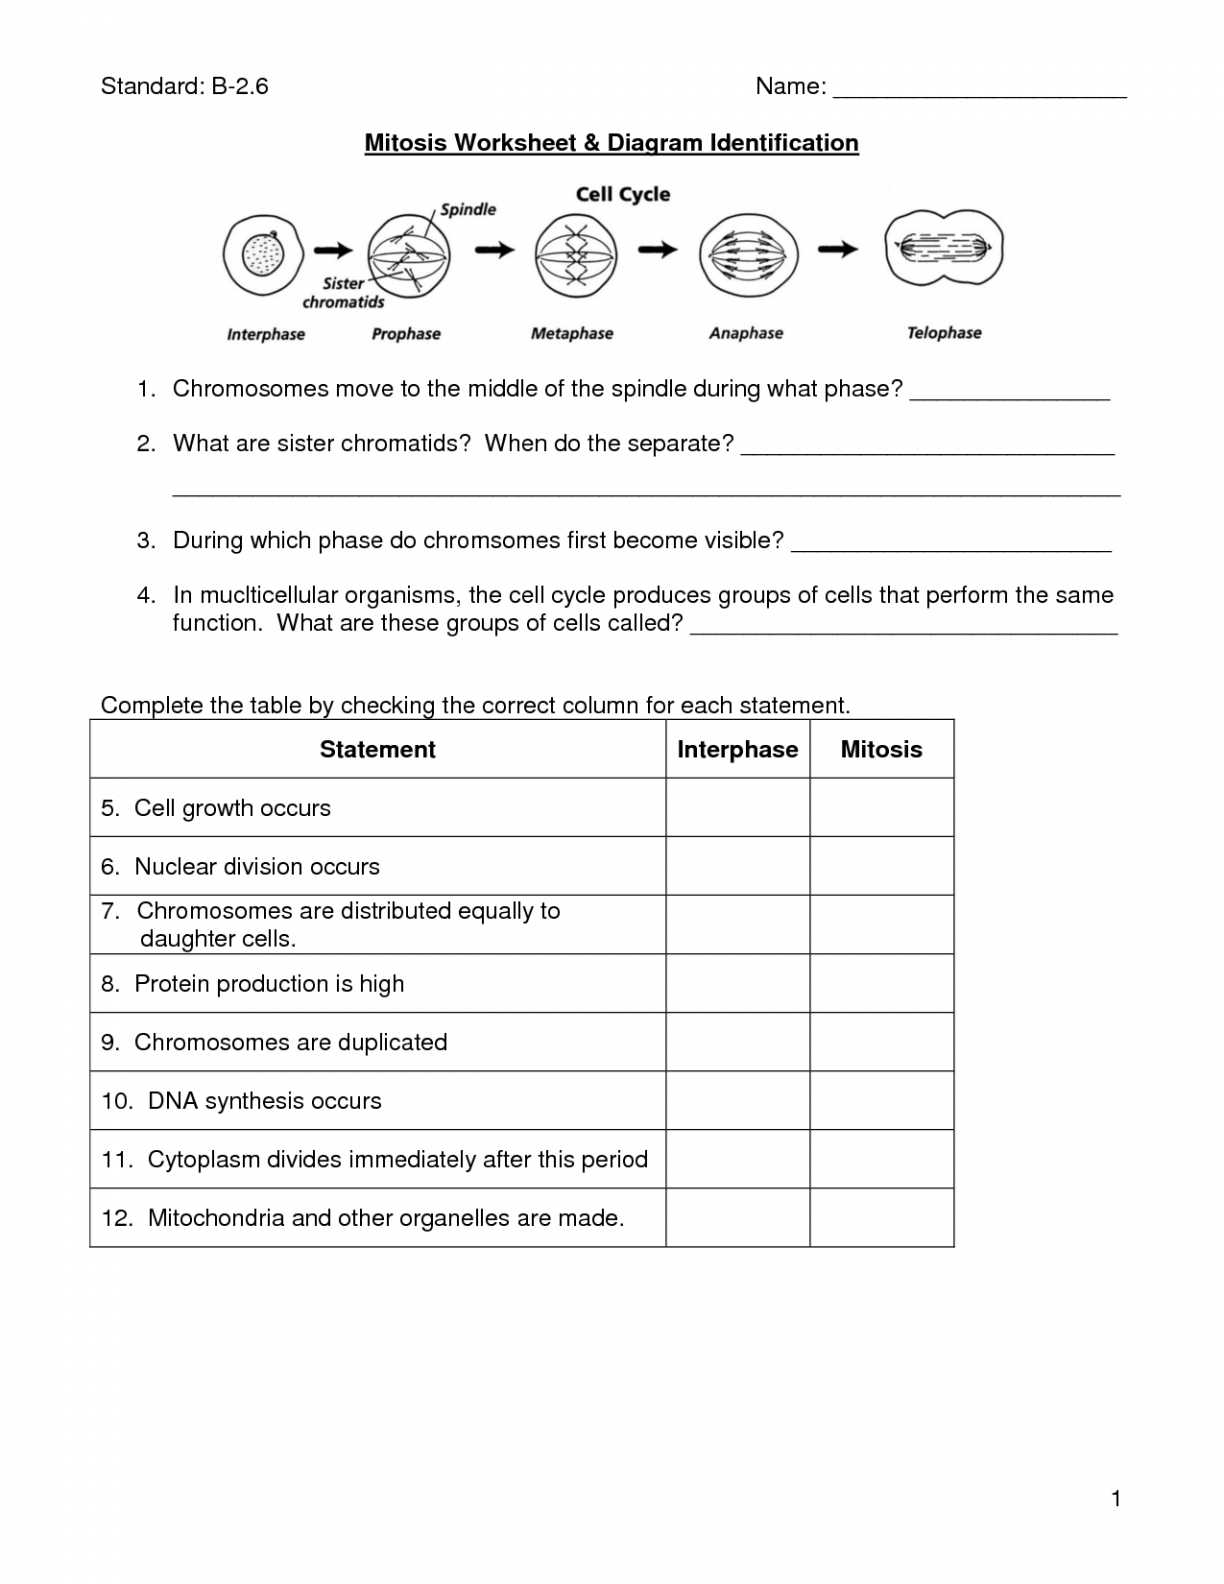 Interest Groups Worksheet Answers or 4th Grade Math Problems Worksheets Printable Word who Caught the